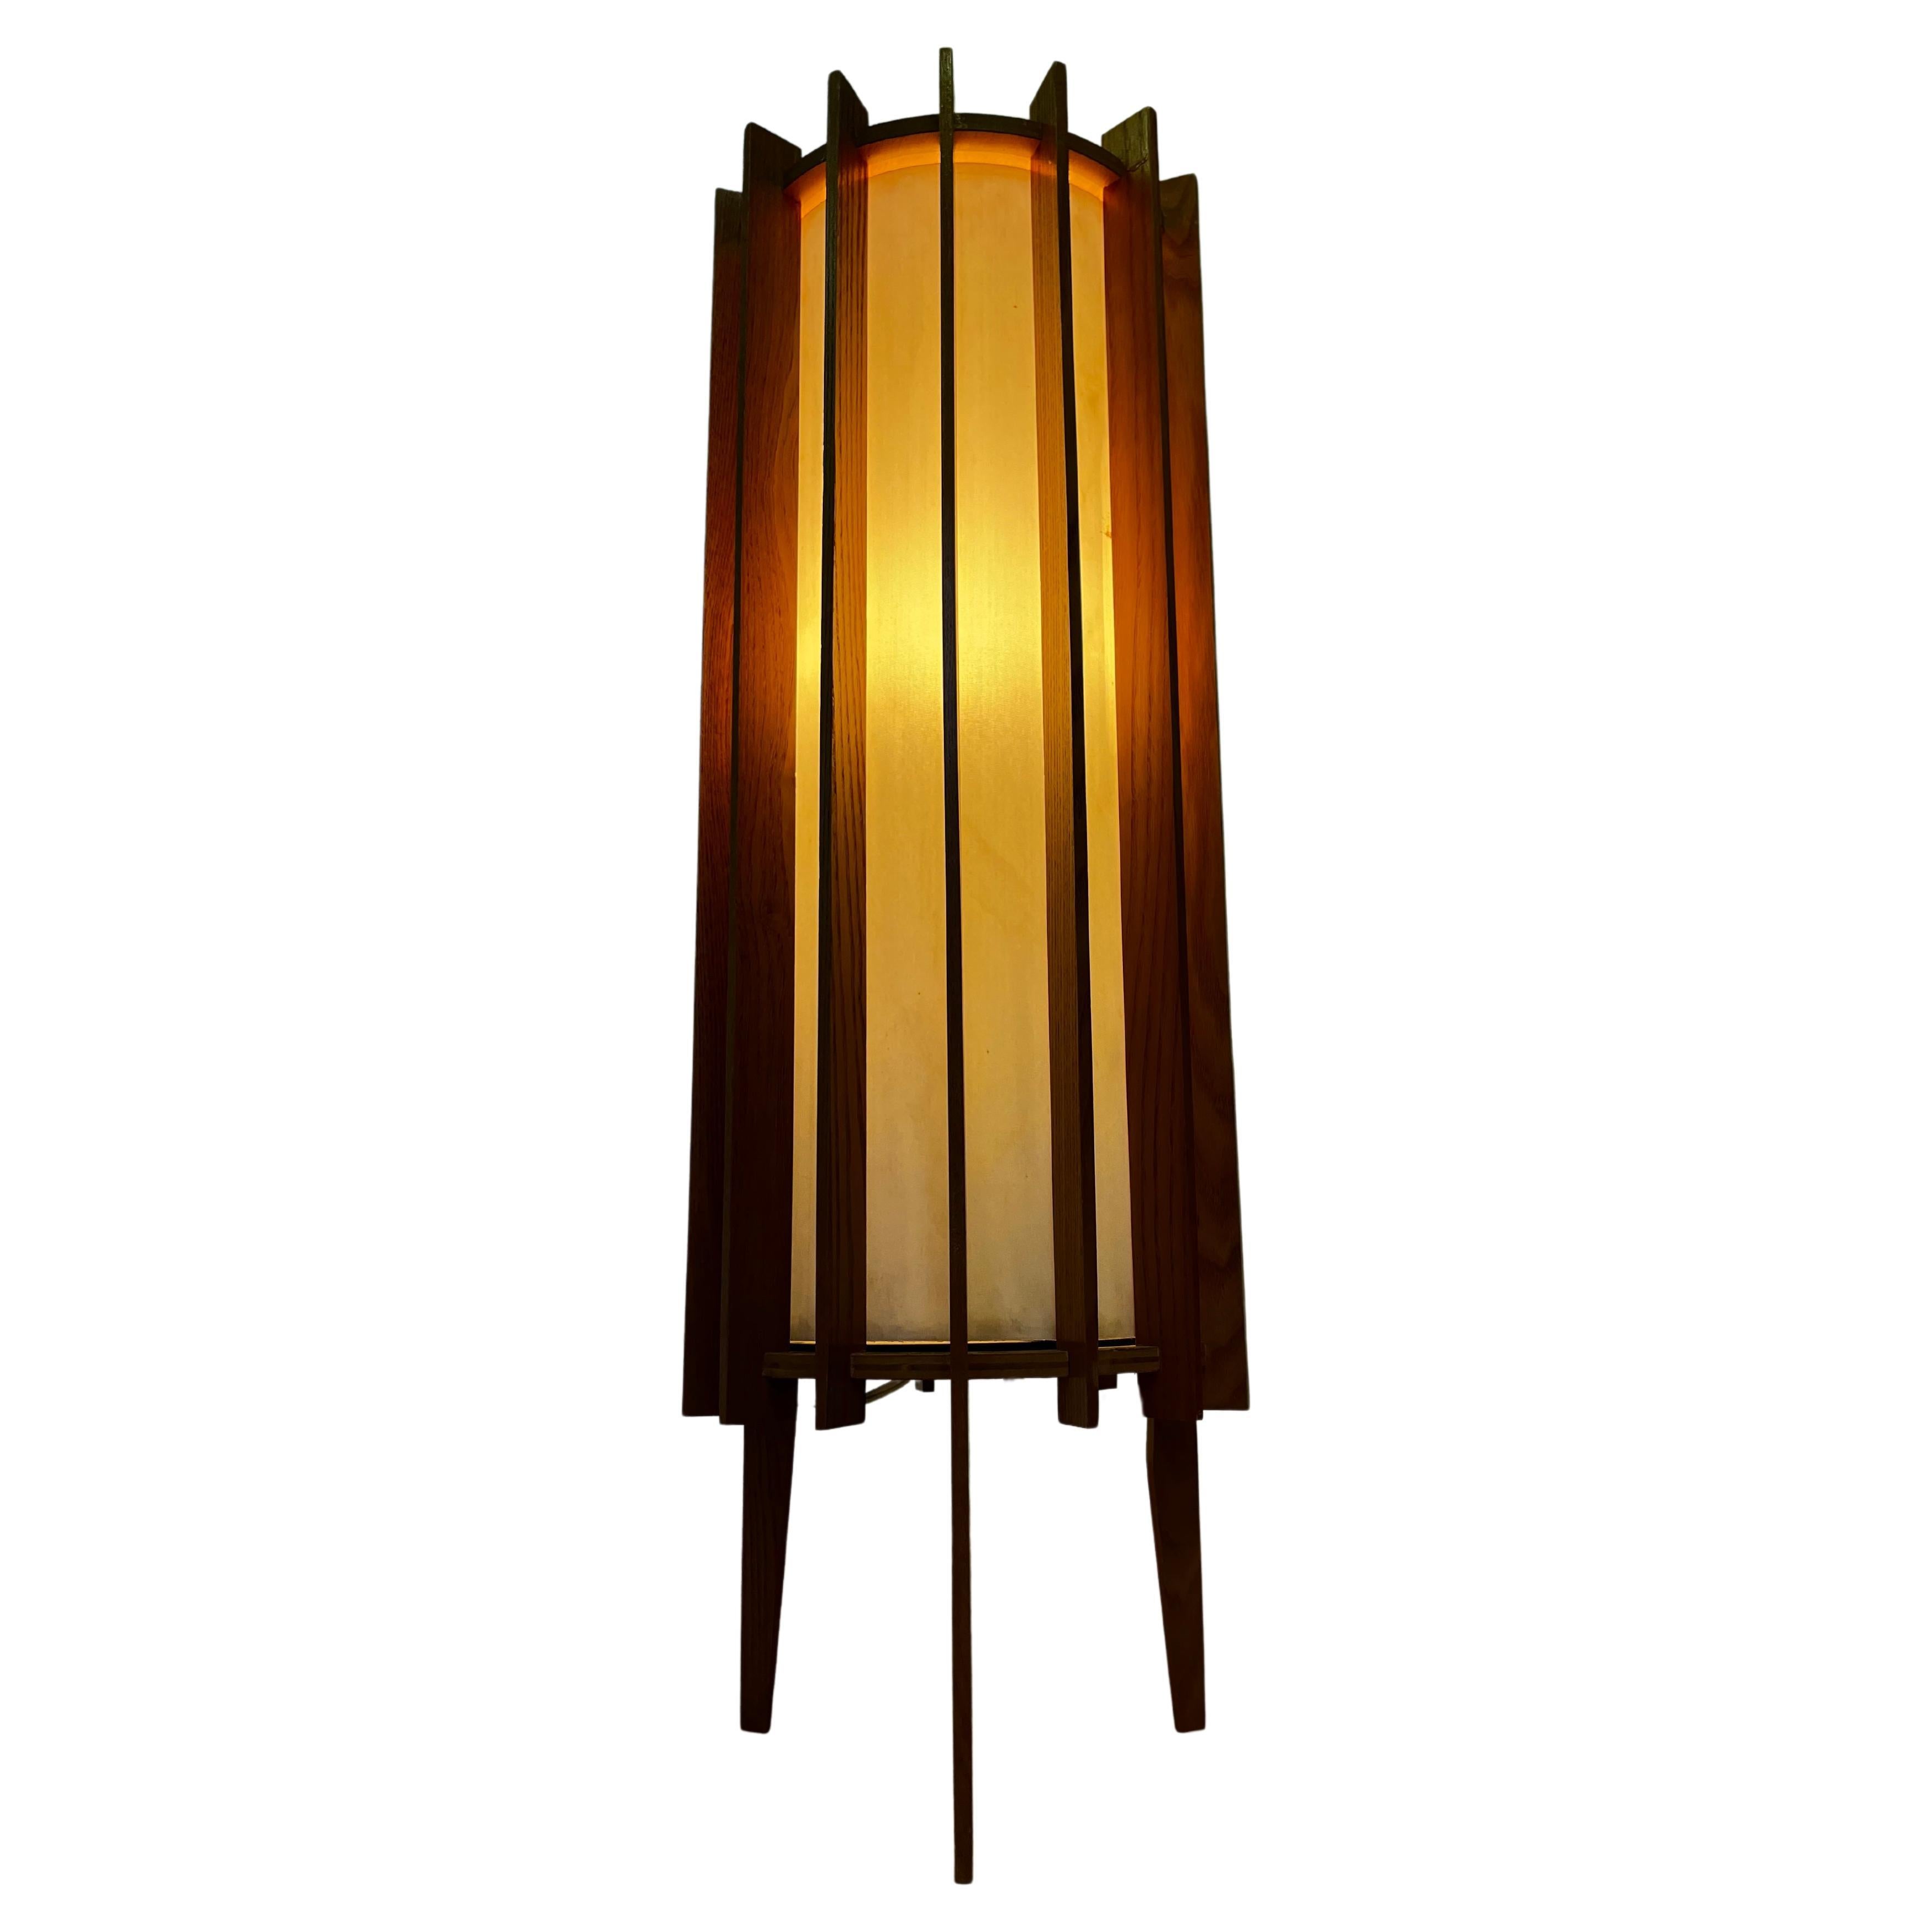 Midcentury Space Age Floor Lamp "Rocket" by Pokrok Zilina, 1960s - 2 pieces For Sale